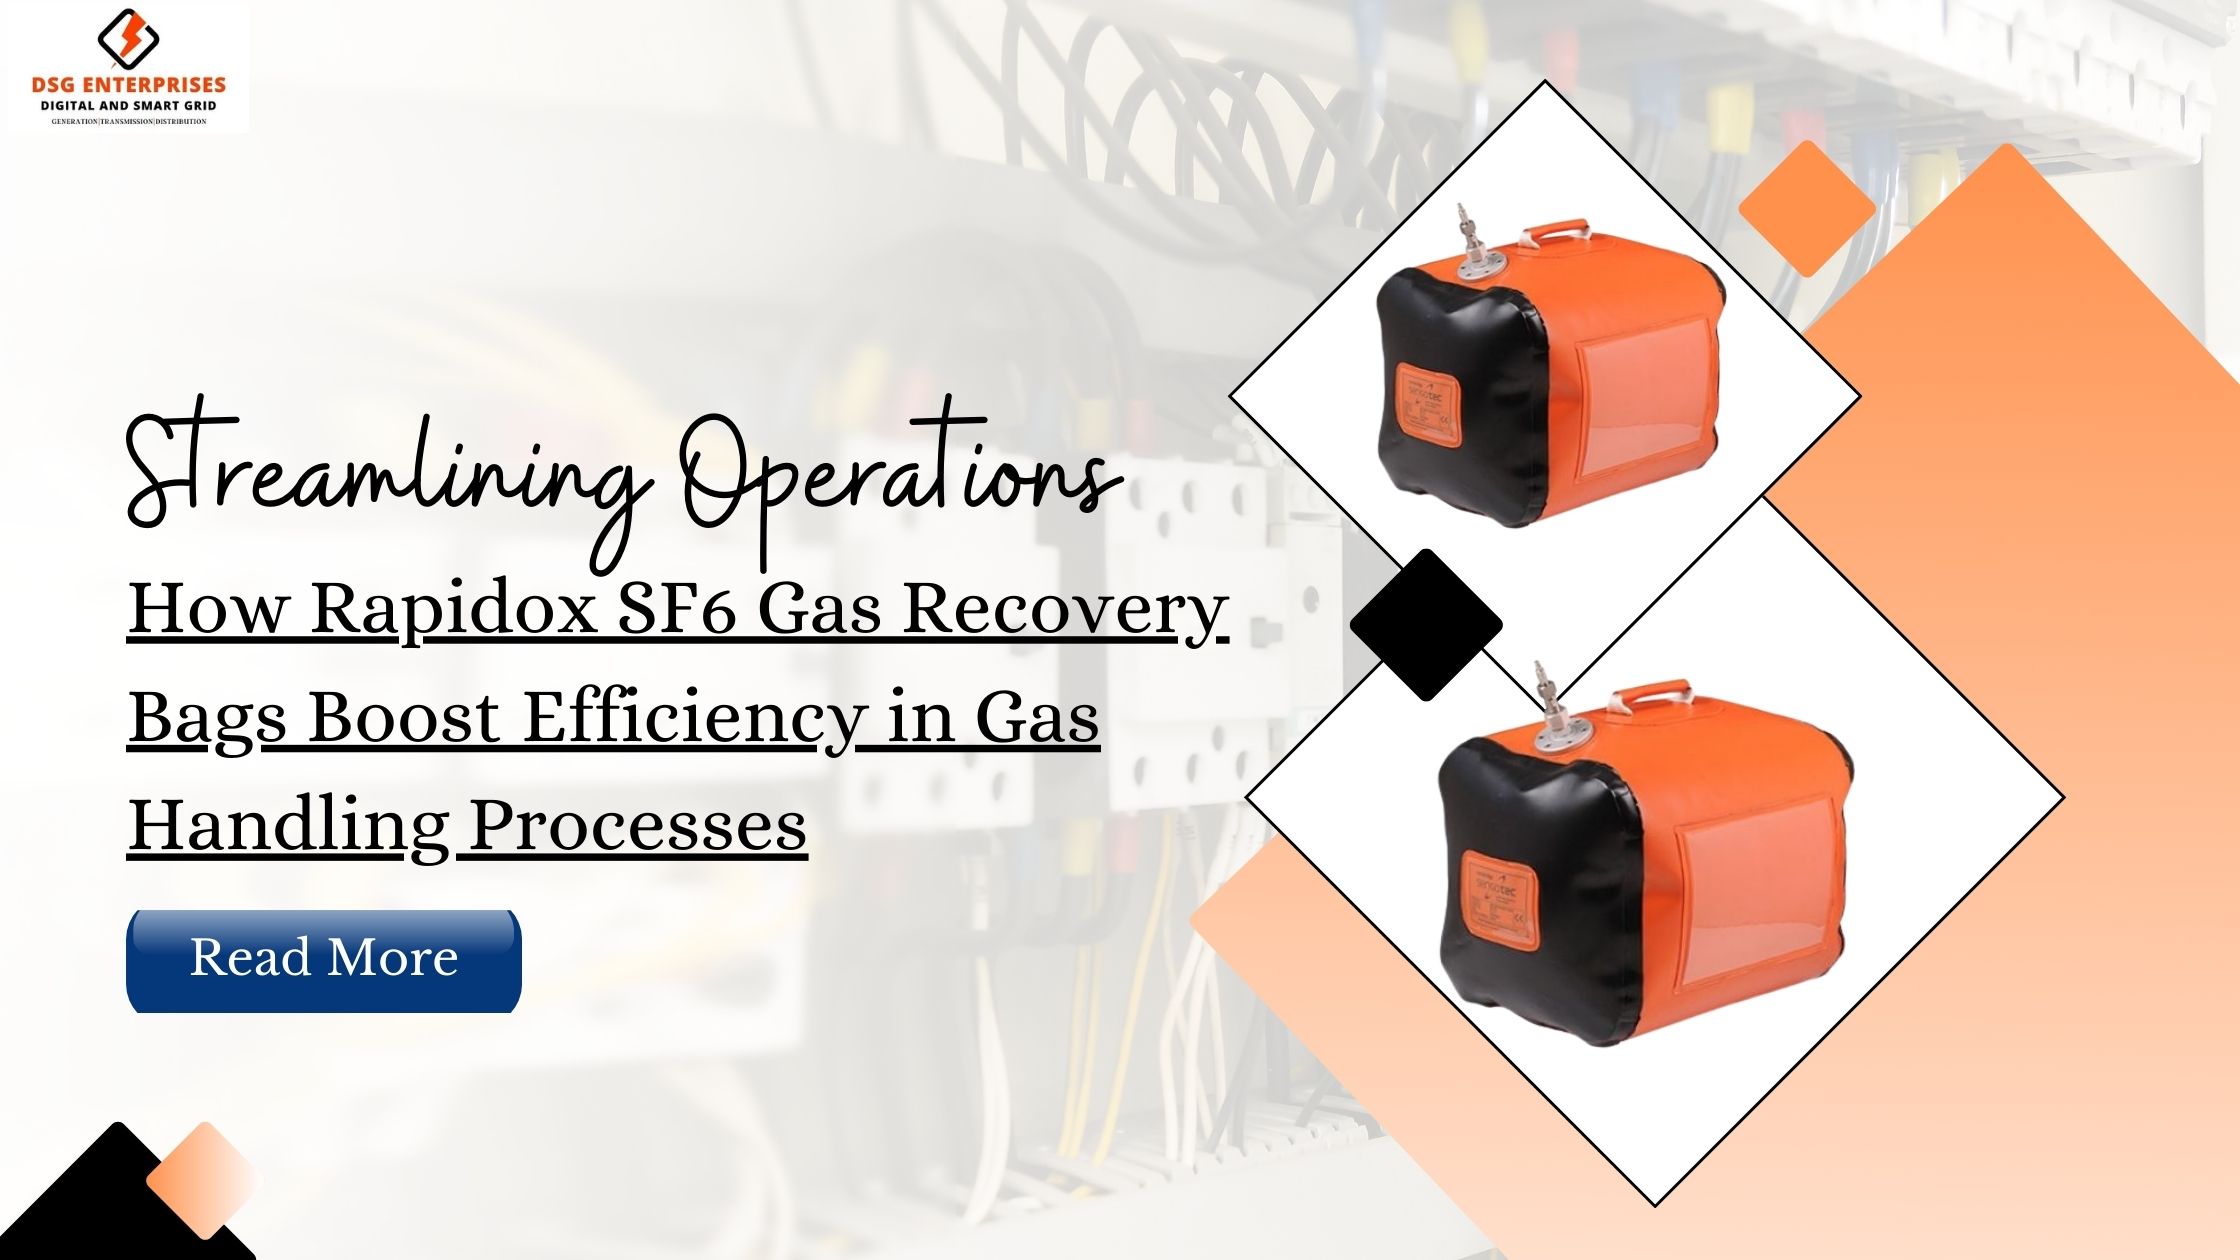 You are currently viewing Streamlining Operations: How Rapidox SF6 Gas Recovery Bags Boost Efficiency in Gas Handling Processes